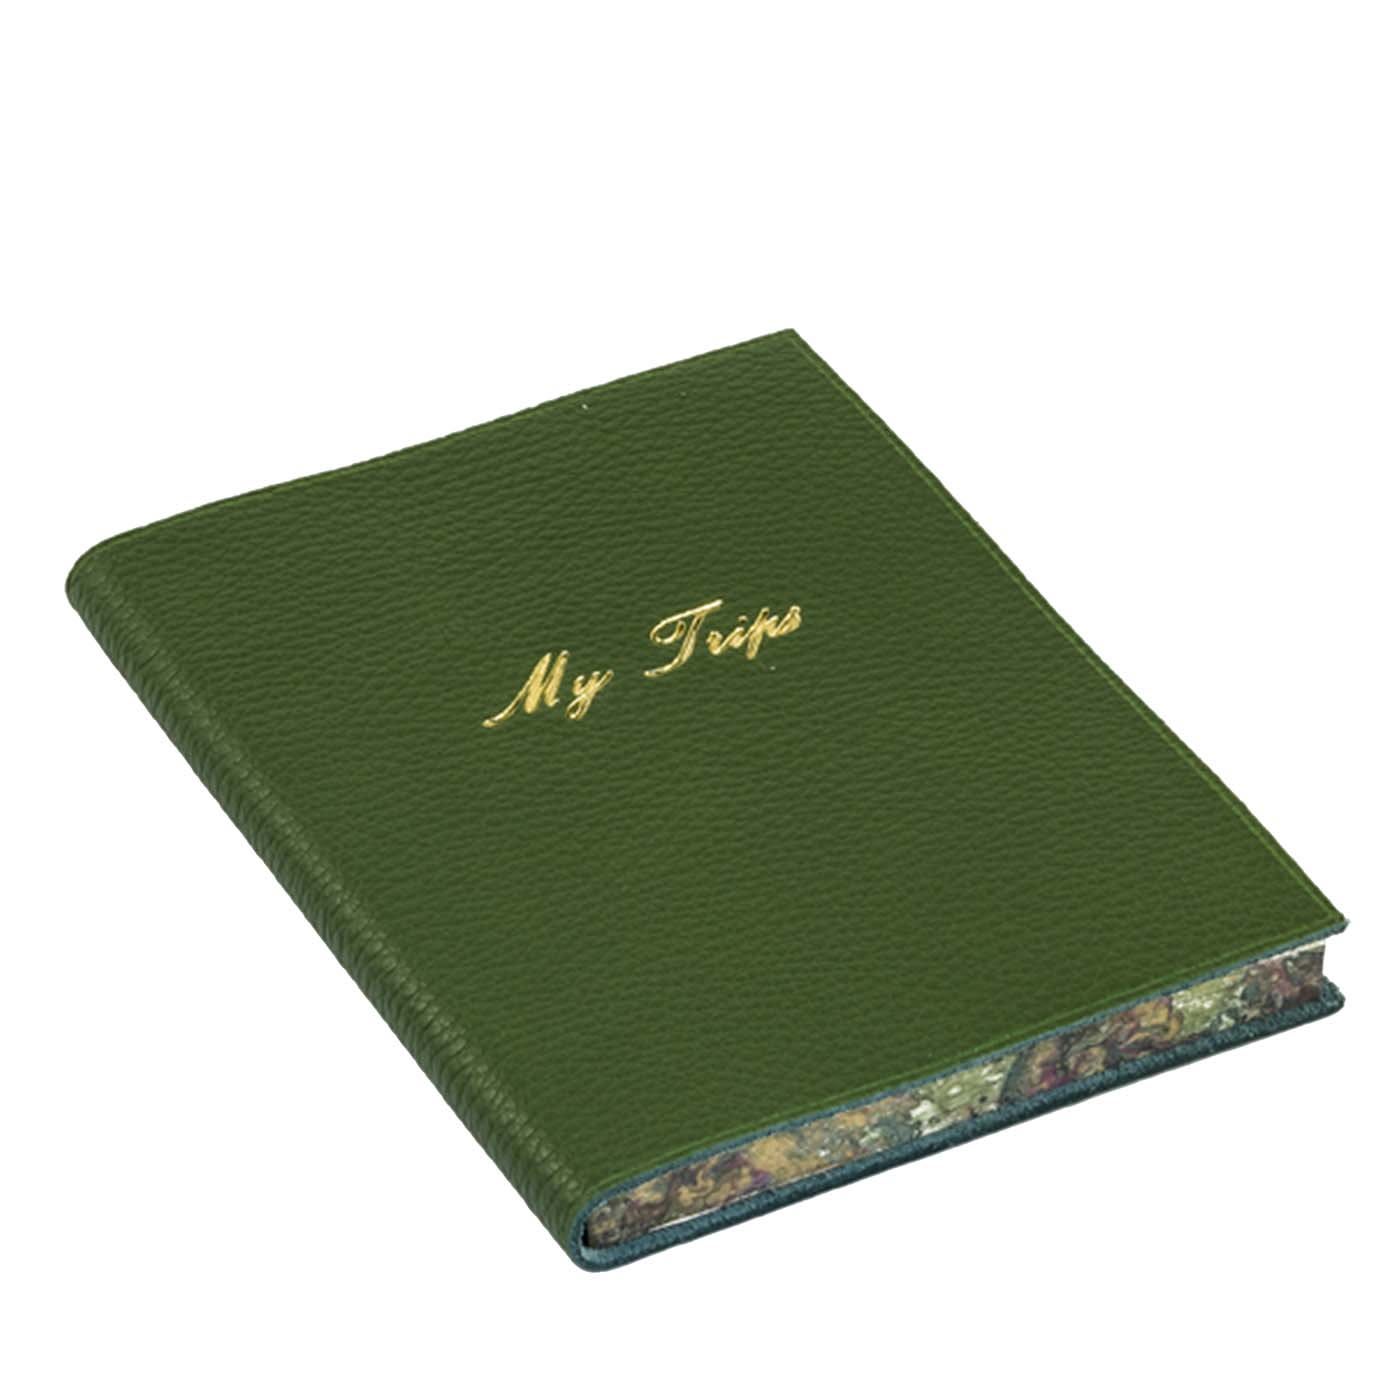 My Trips Set of 2 Green Journals - Giannini